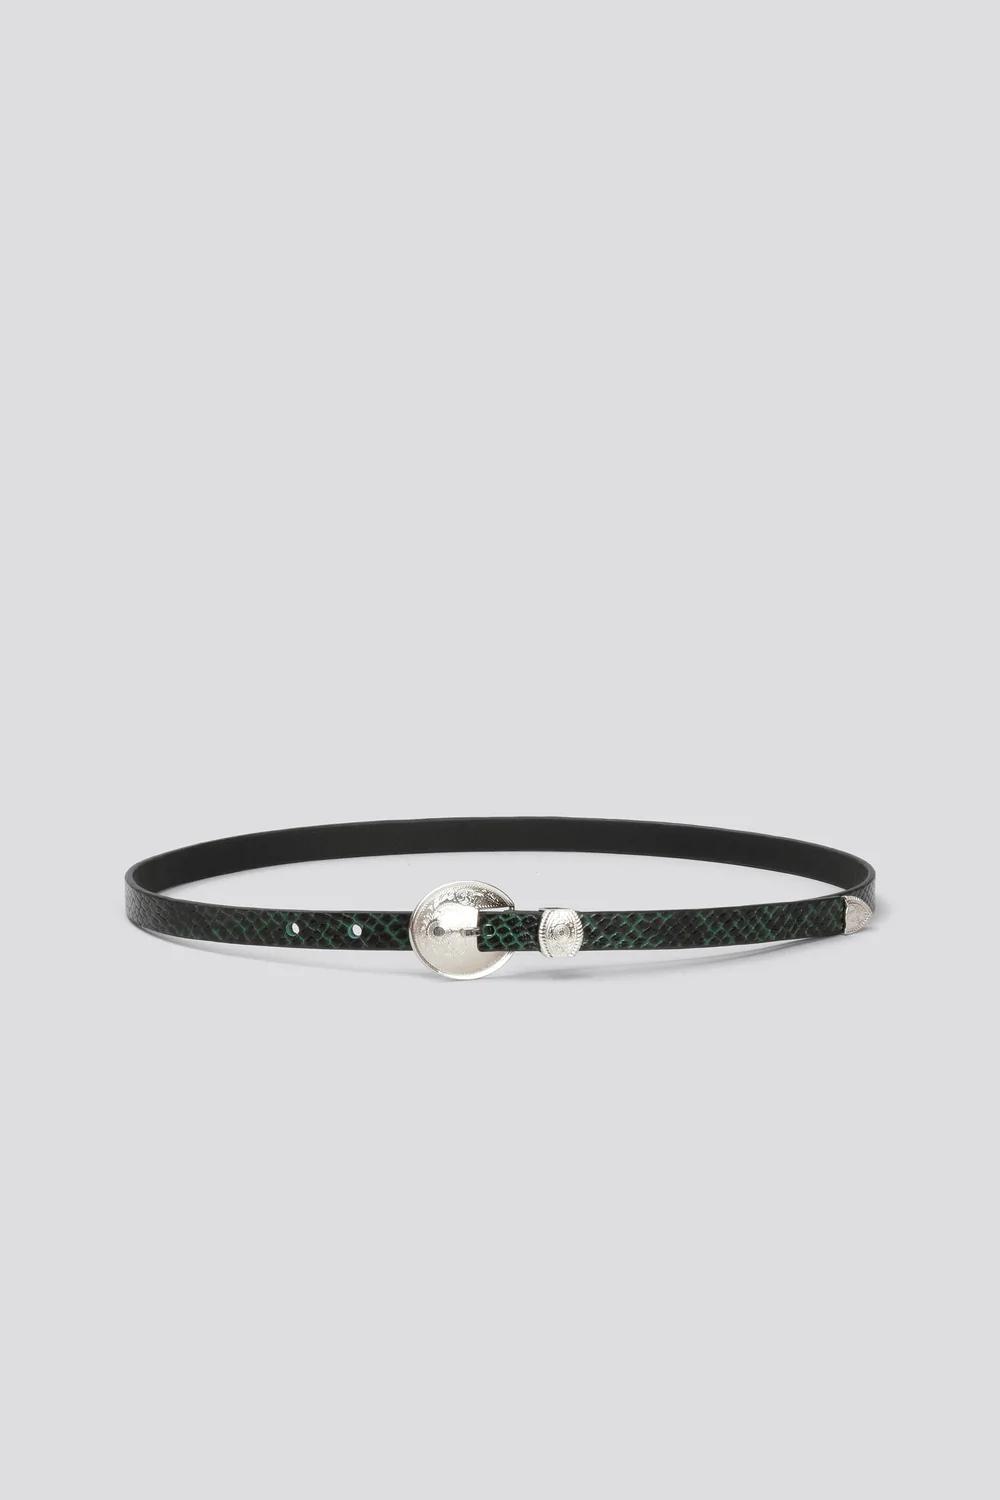 Product Image for Western Belt, Green Croc